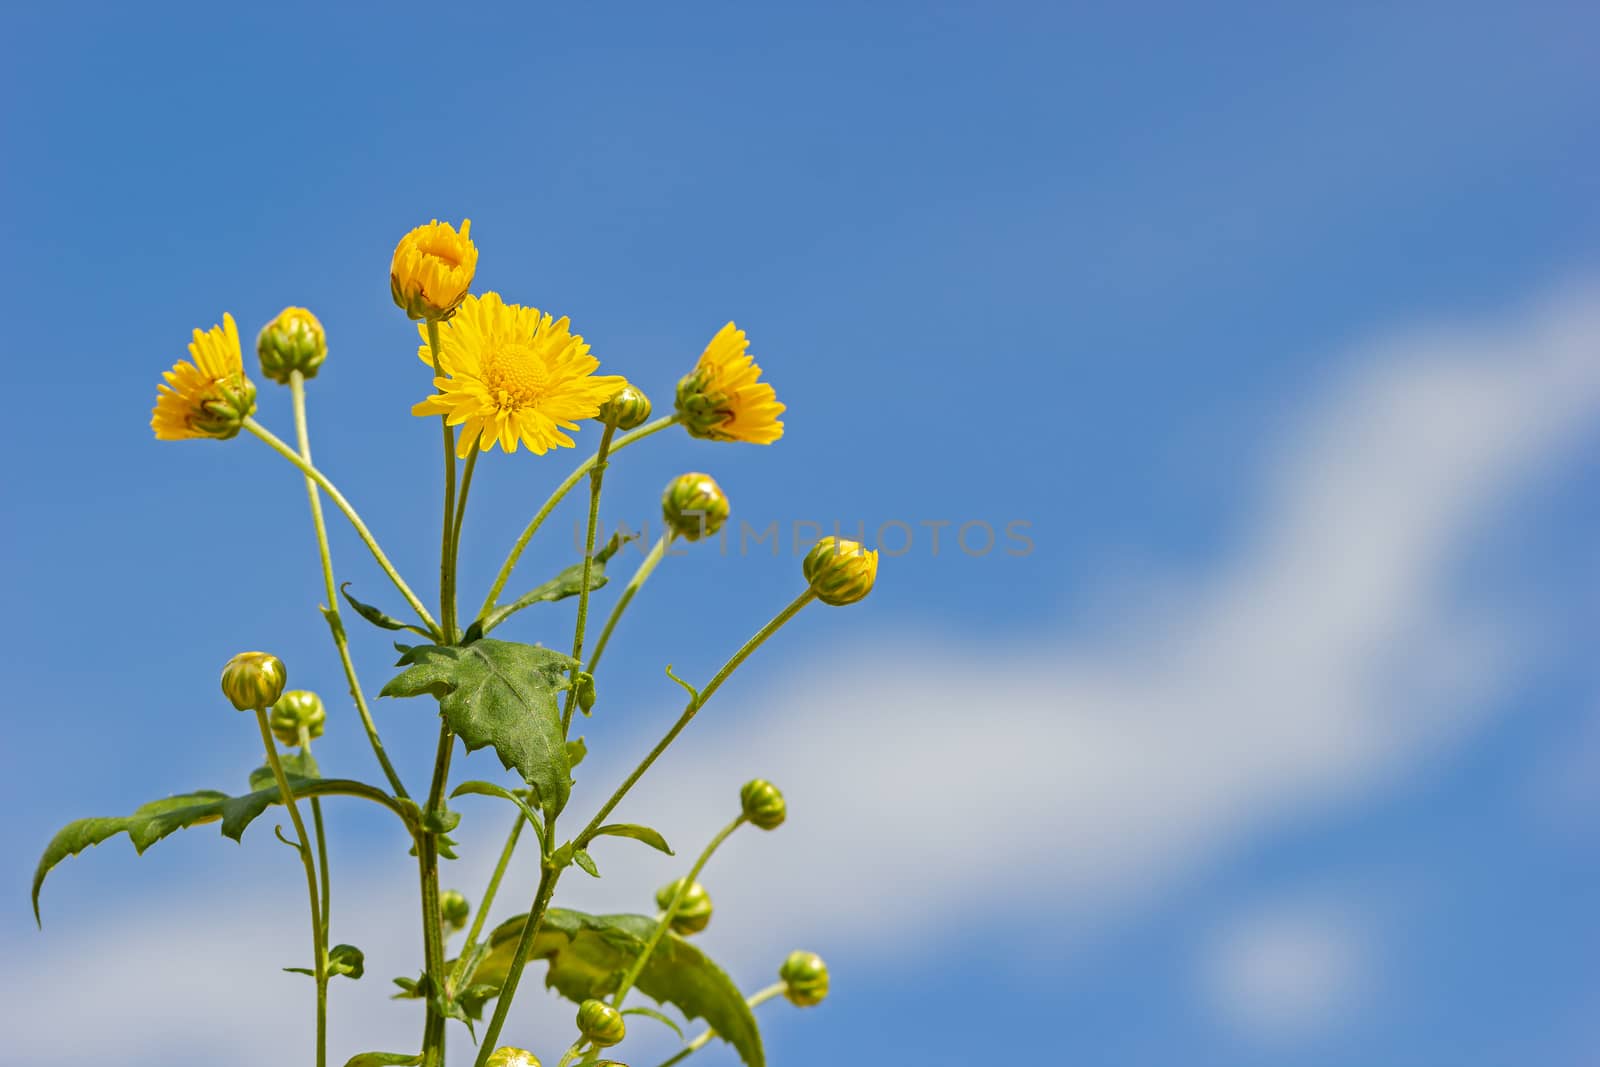 Yellow chrysanthemum in the white clouds and blue sky background by SaitanSainam